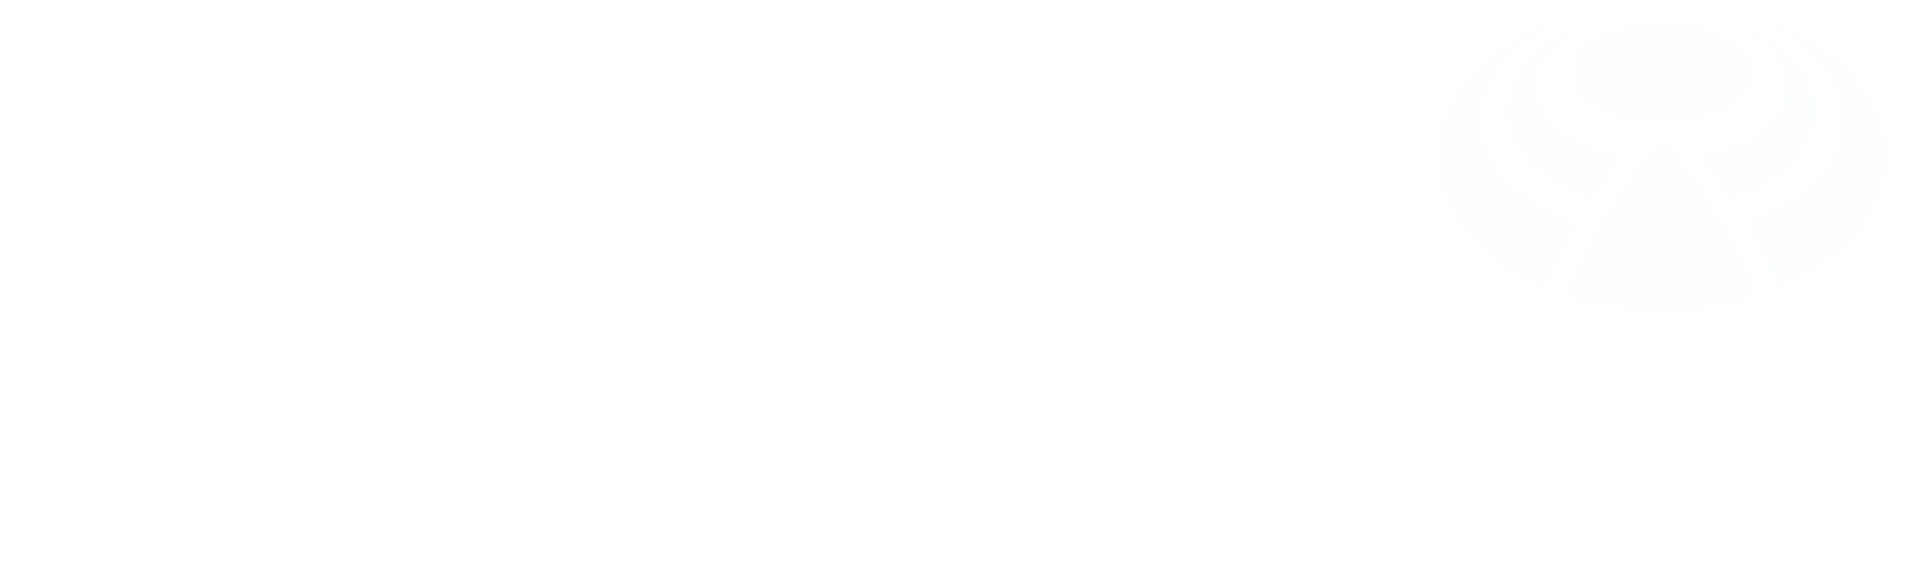 The Business Generation Group